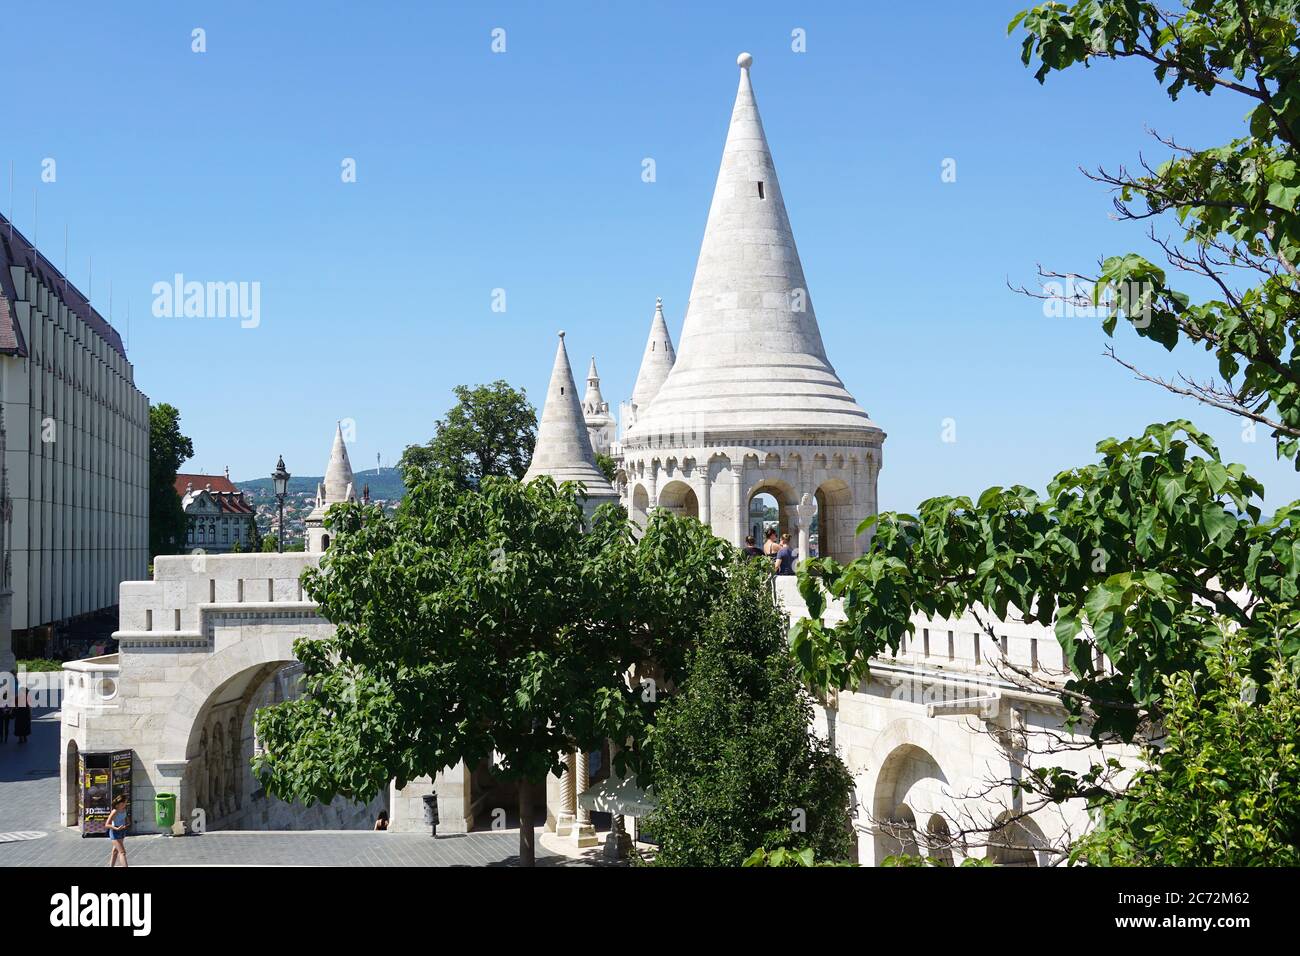 Fisherman's Bastion is a terrace in neo-Gothic and neo-Romanesque style situated on the Buda bank of the Danube, Castle Quarter, Budapest, Hubgary Stock Photo